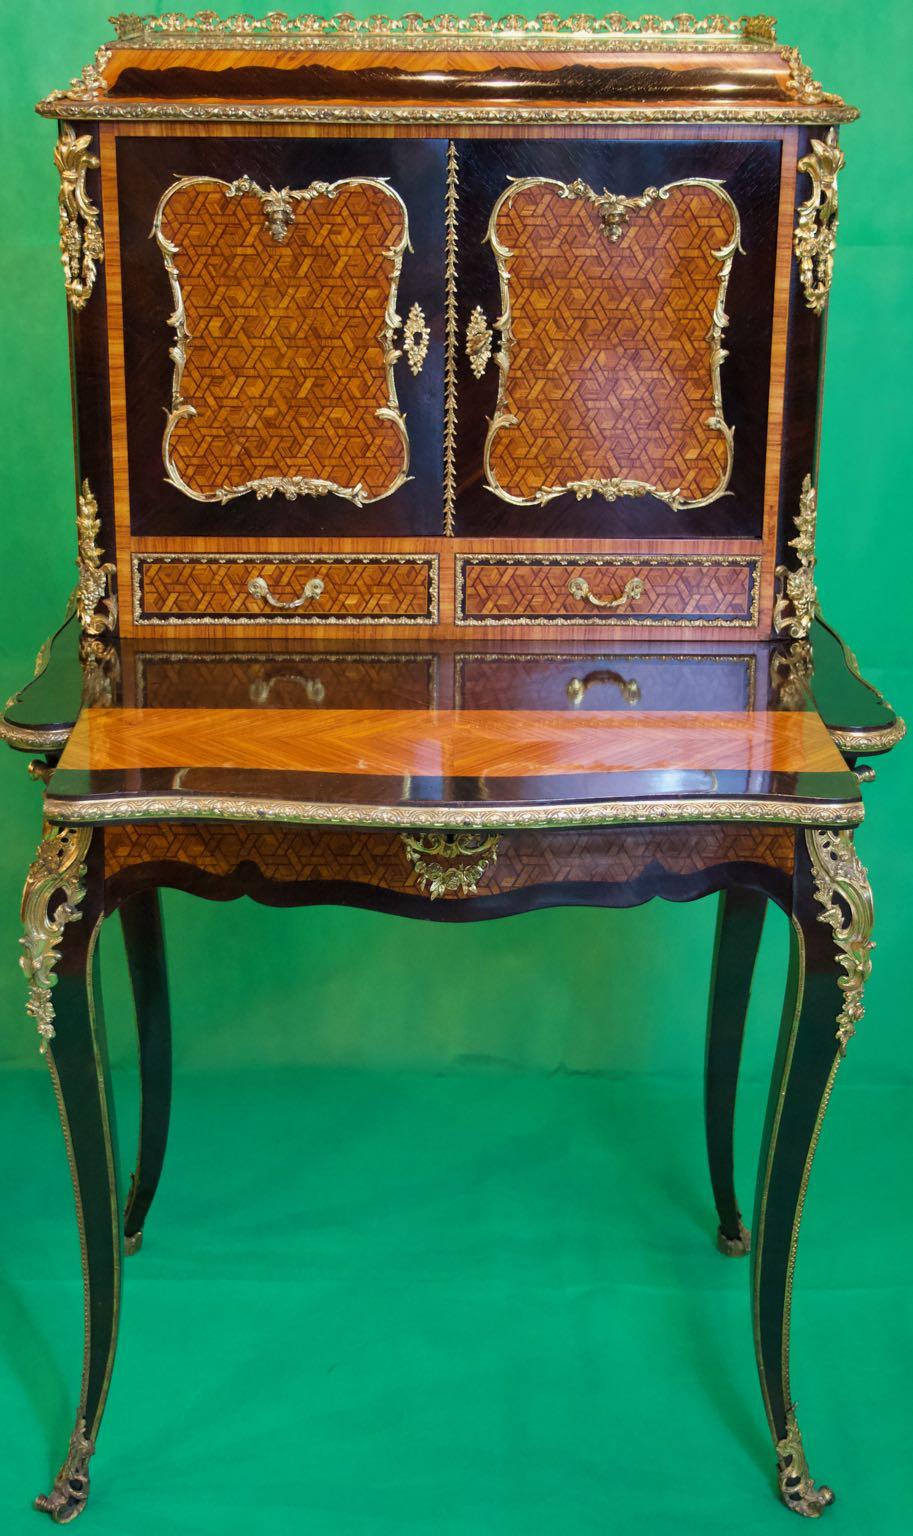 French Bonheur du Jour writing table, Napoleon III era (1847-1870) in rosewood and kingwood, refined mercury-gilt bronze applications on all edges of the cabinet, other applications embellishing the front and legs. We find a pull-out writing surface